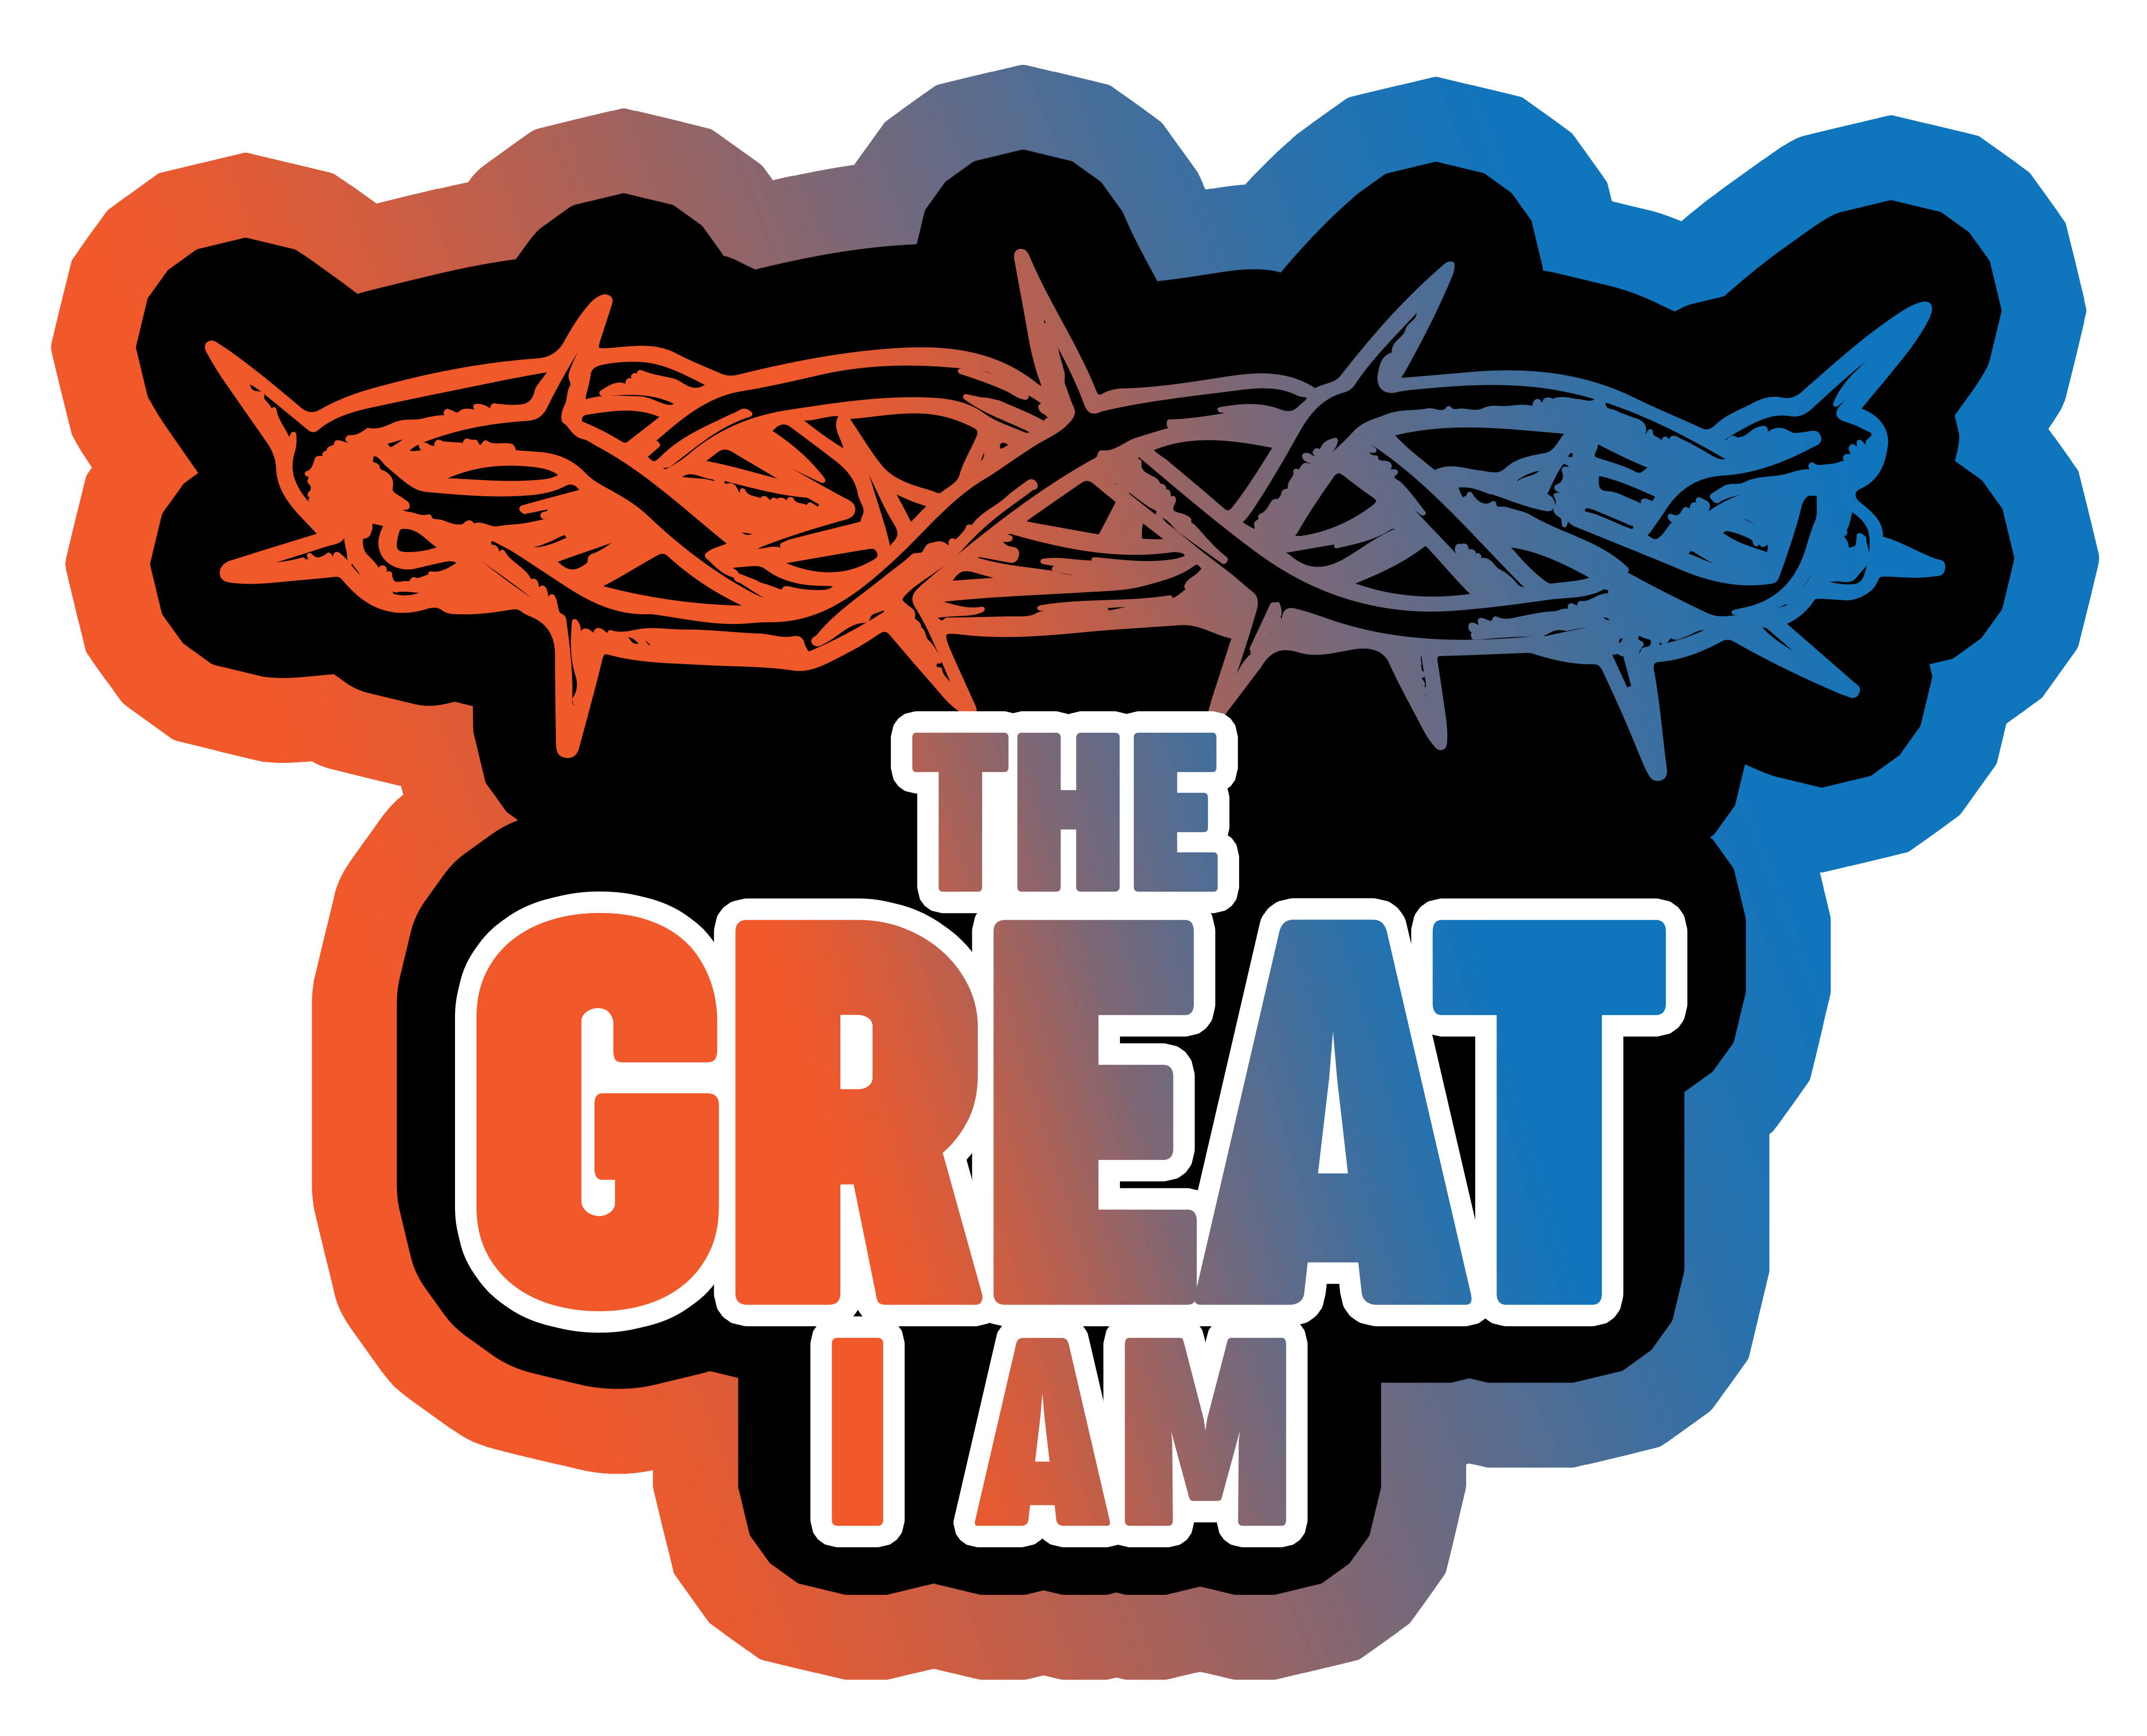 THE GREAT I AM